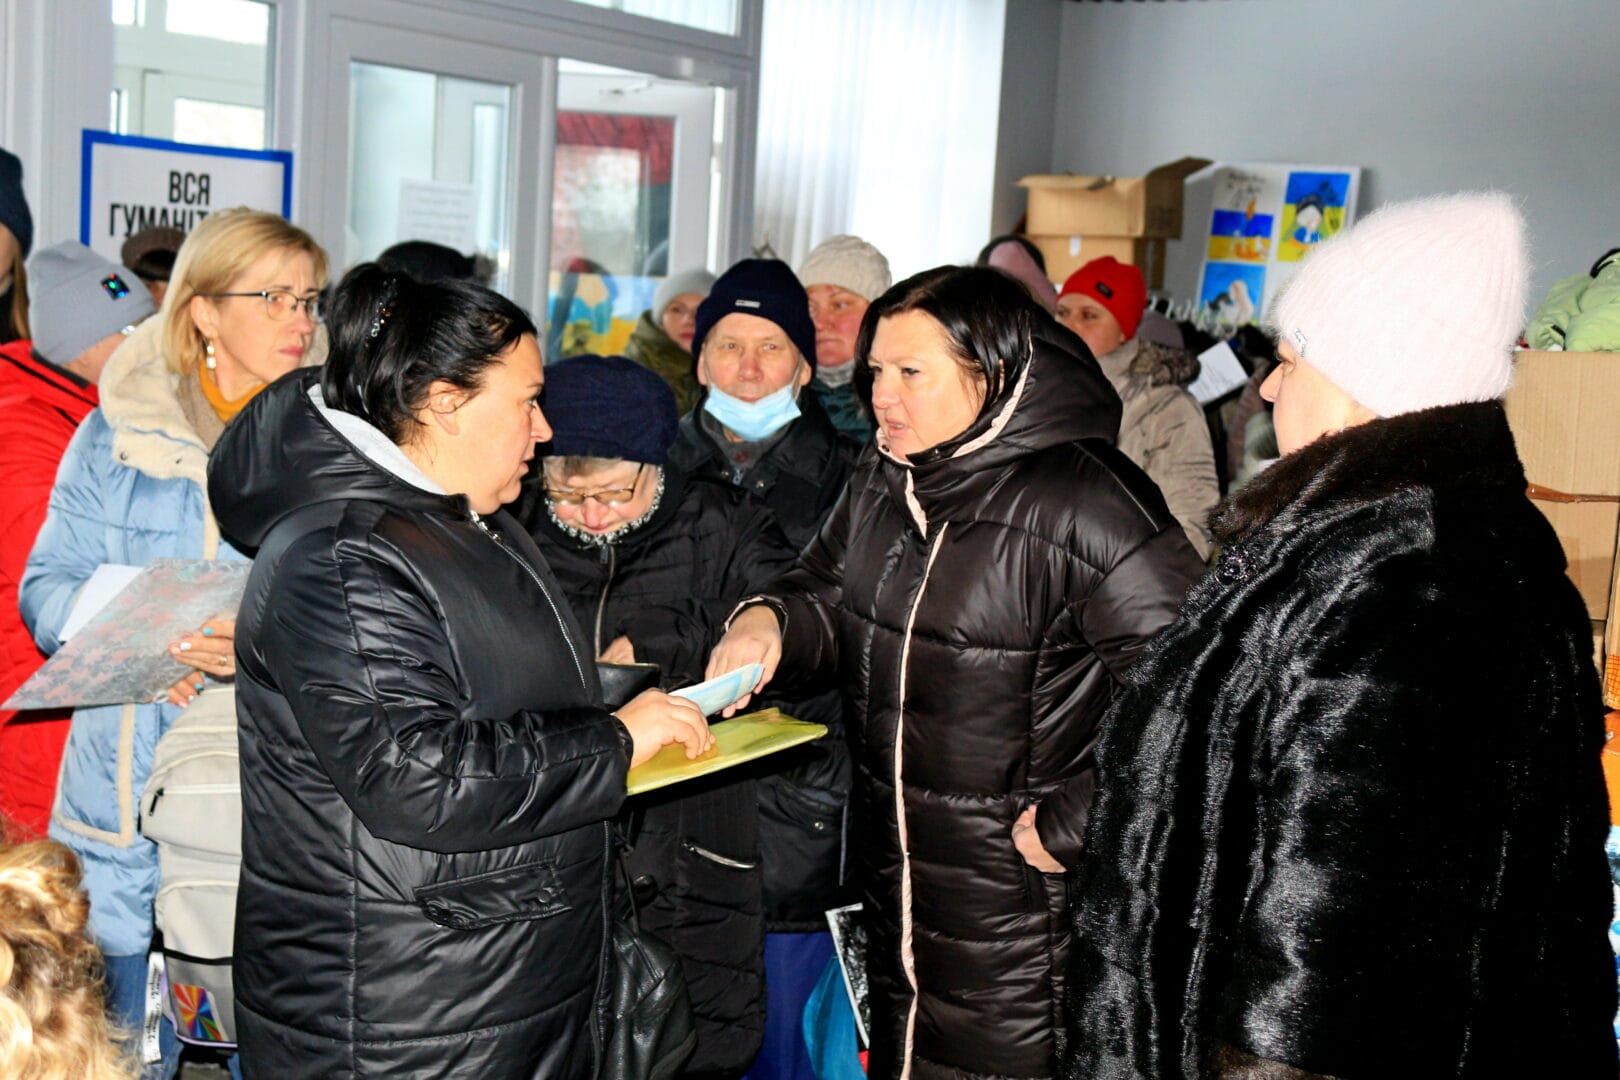 Meeting with internally displaced people of the community at the humanitarian headquarters